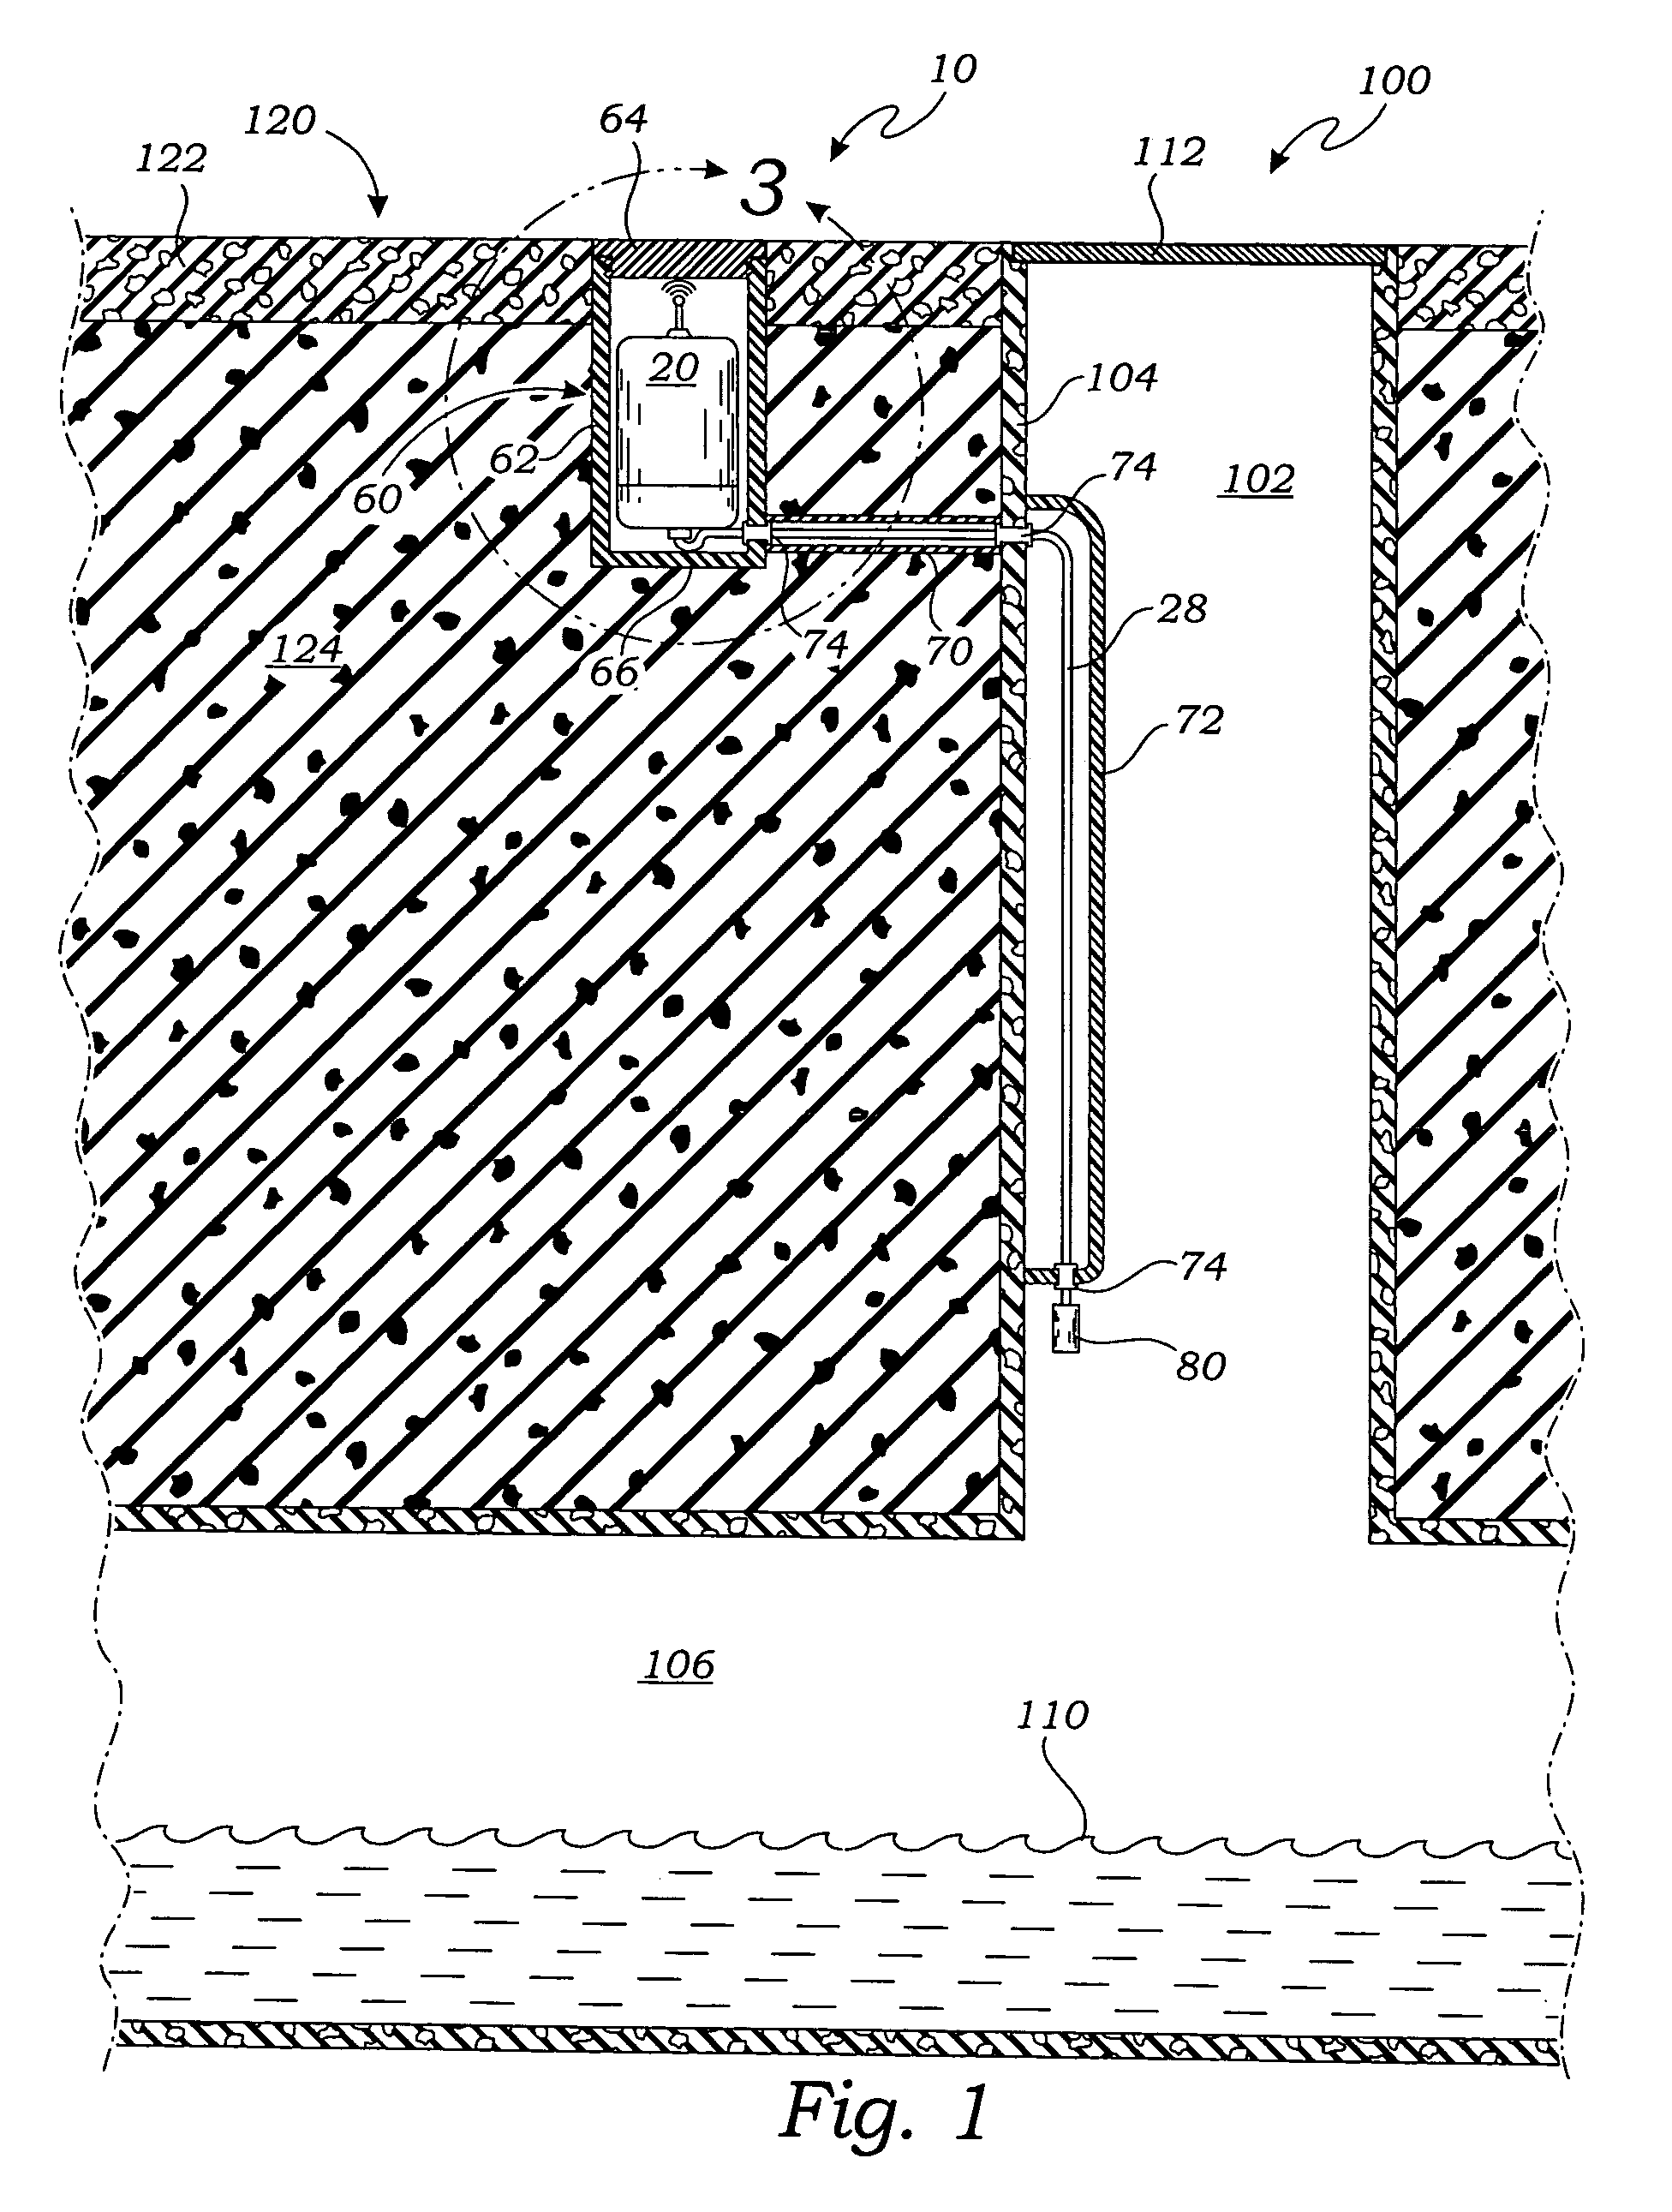 Wireless wastewater system monitoring apparatus and method of use